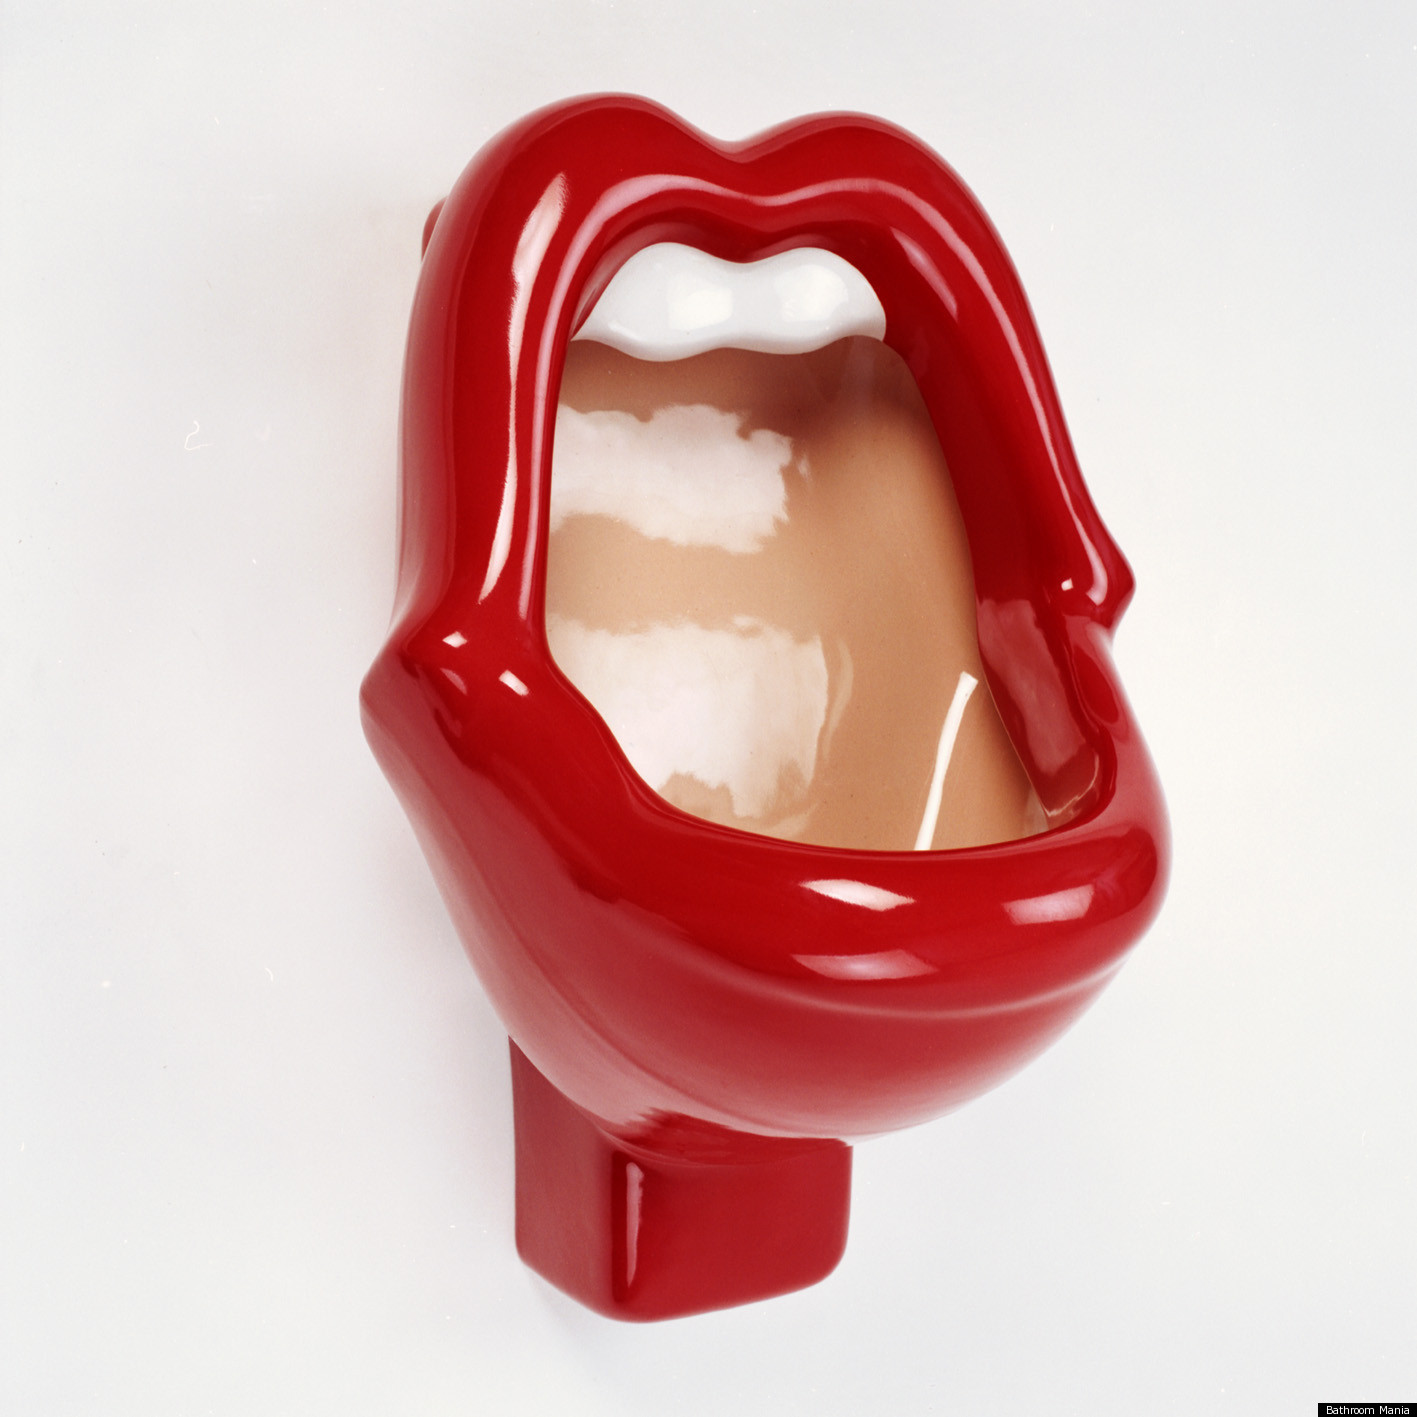 Rolling Stone Mouth Shaped Urinals Called Sexist Photos Huffpost